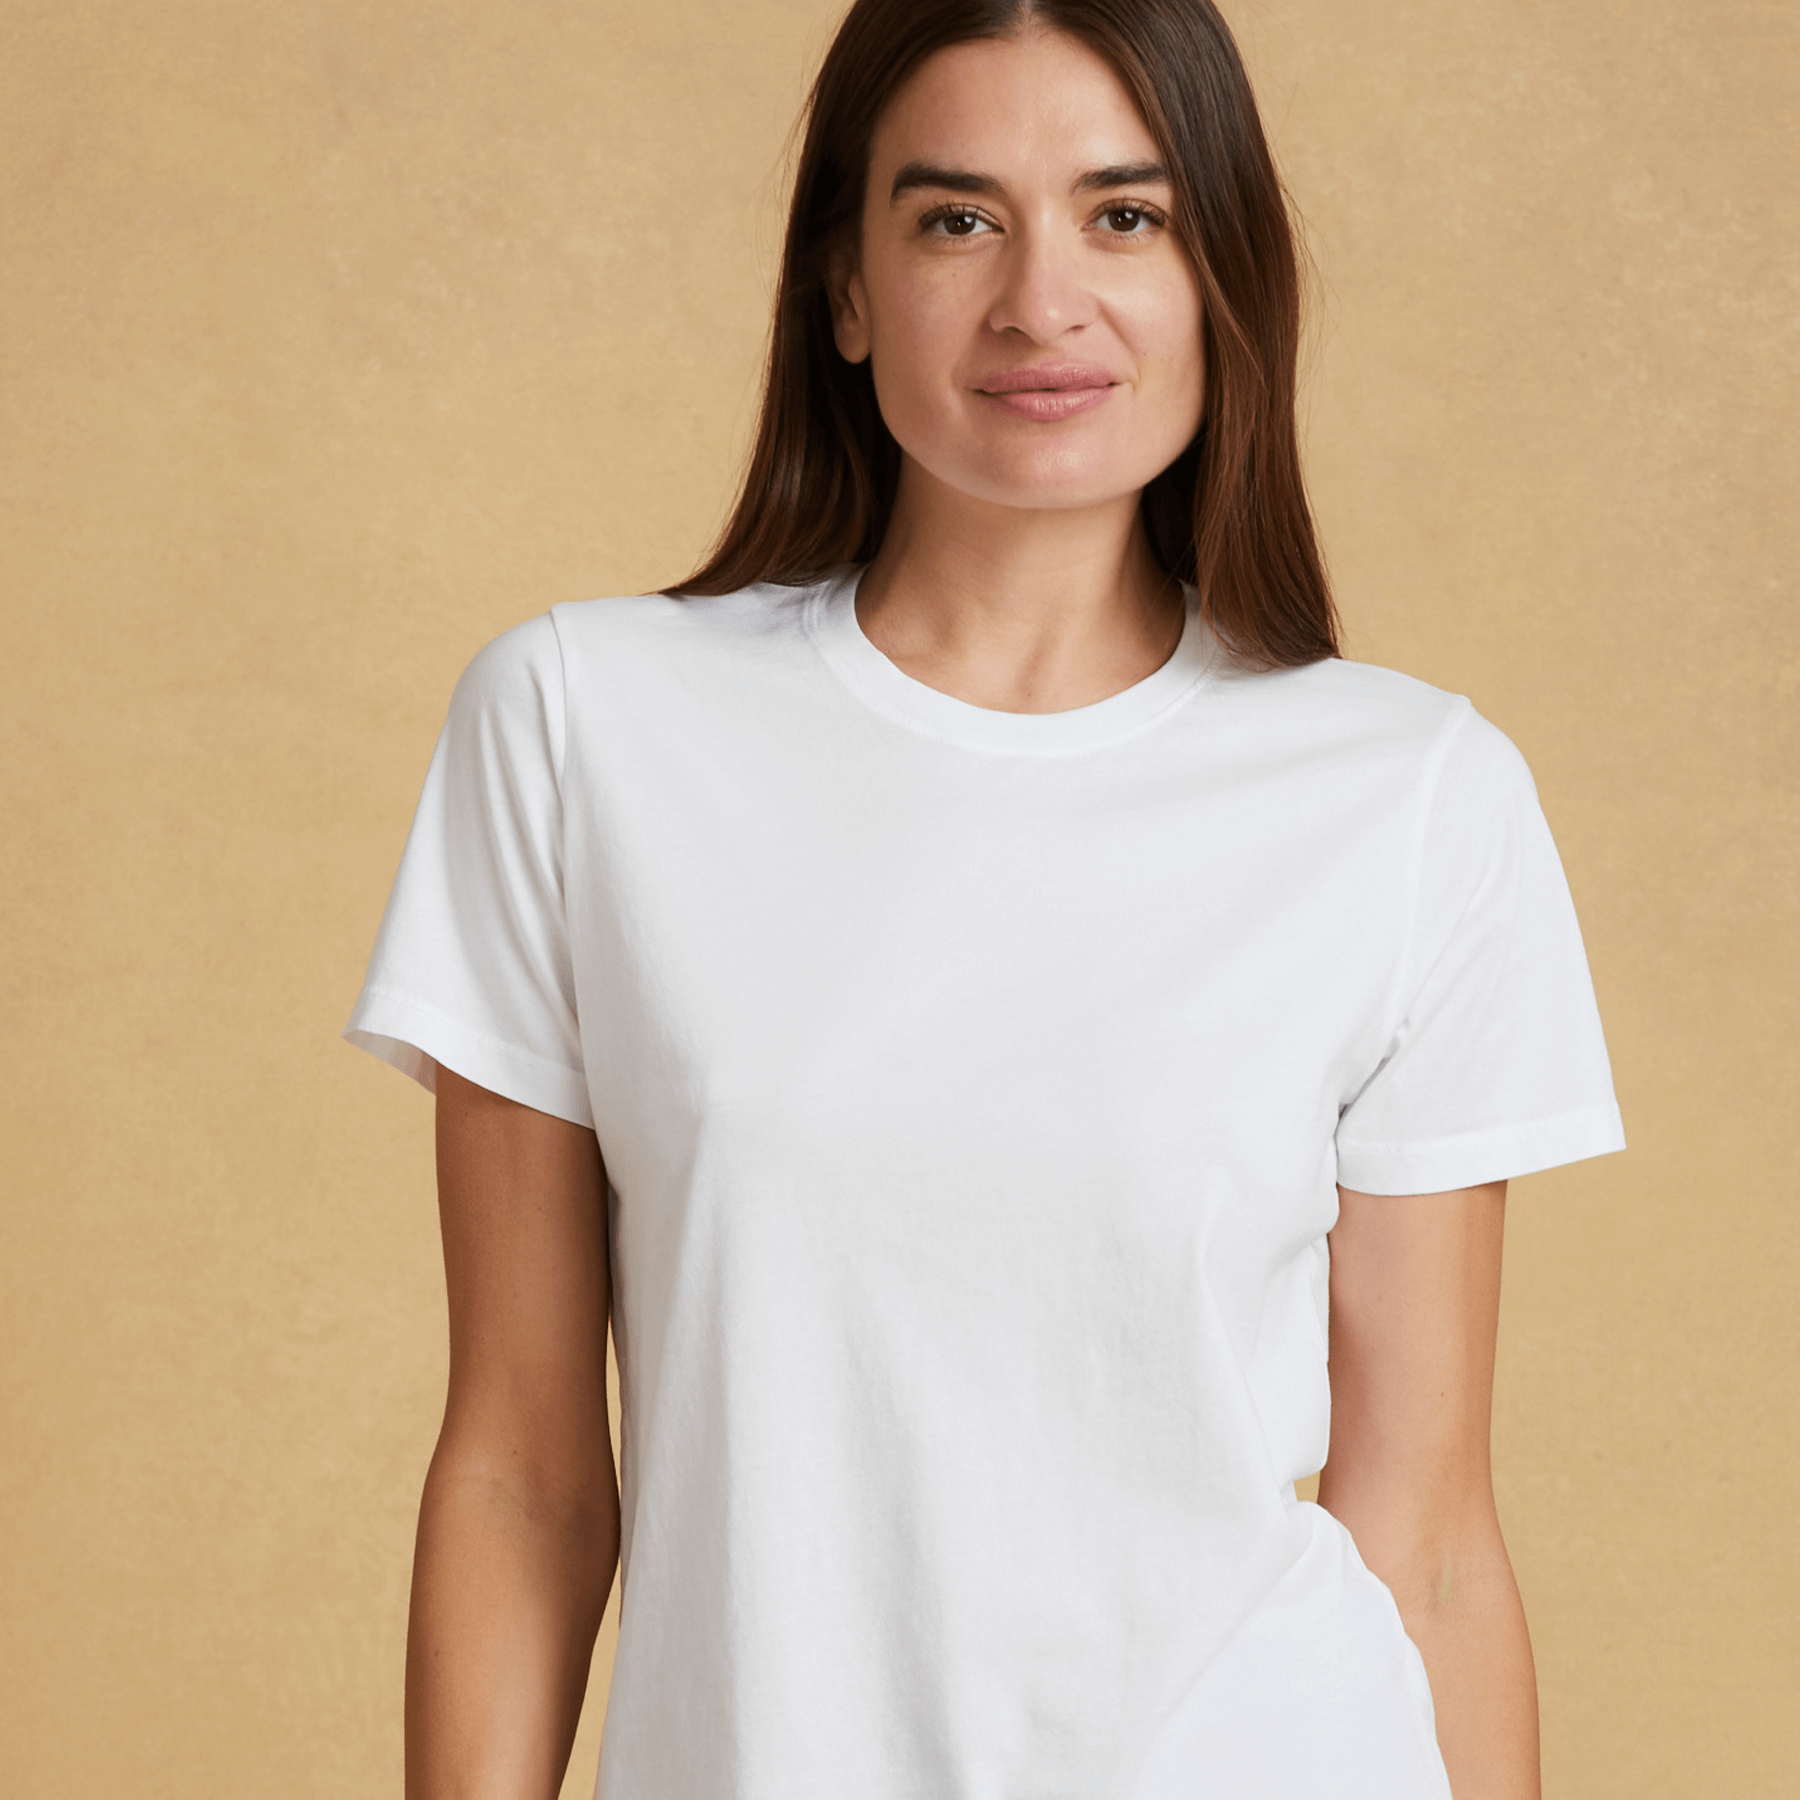 CLASSIC T-SHIRT - Ready-to-Wear